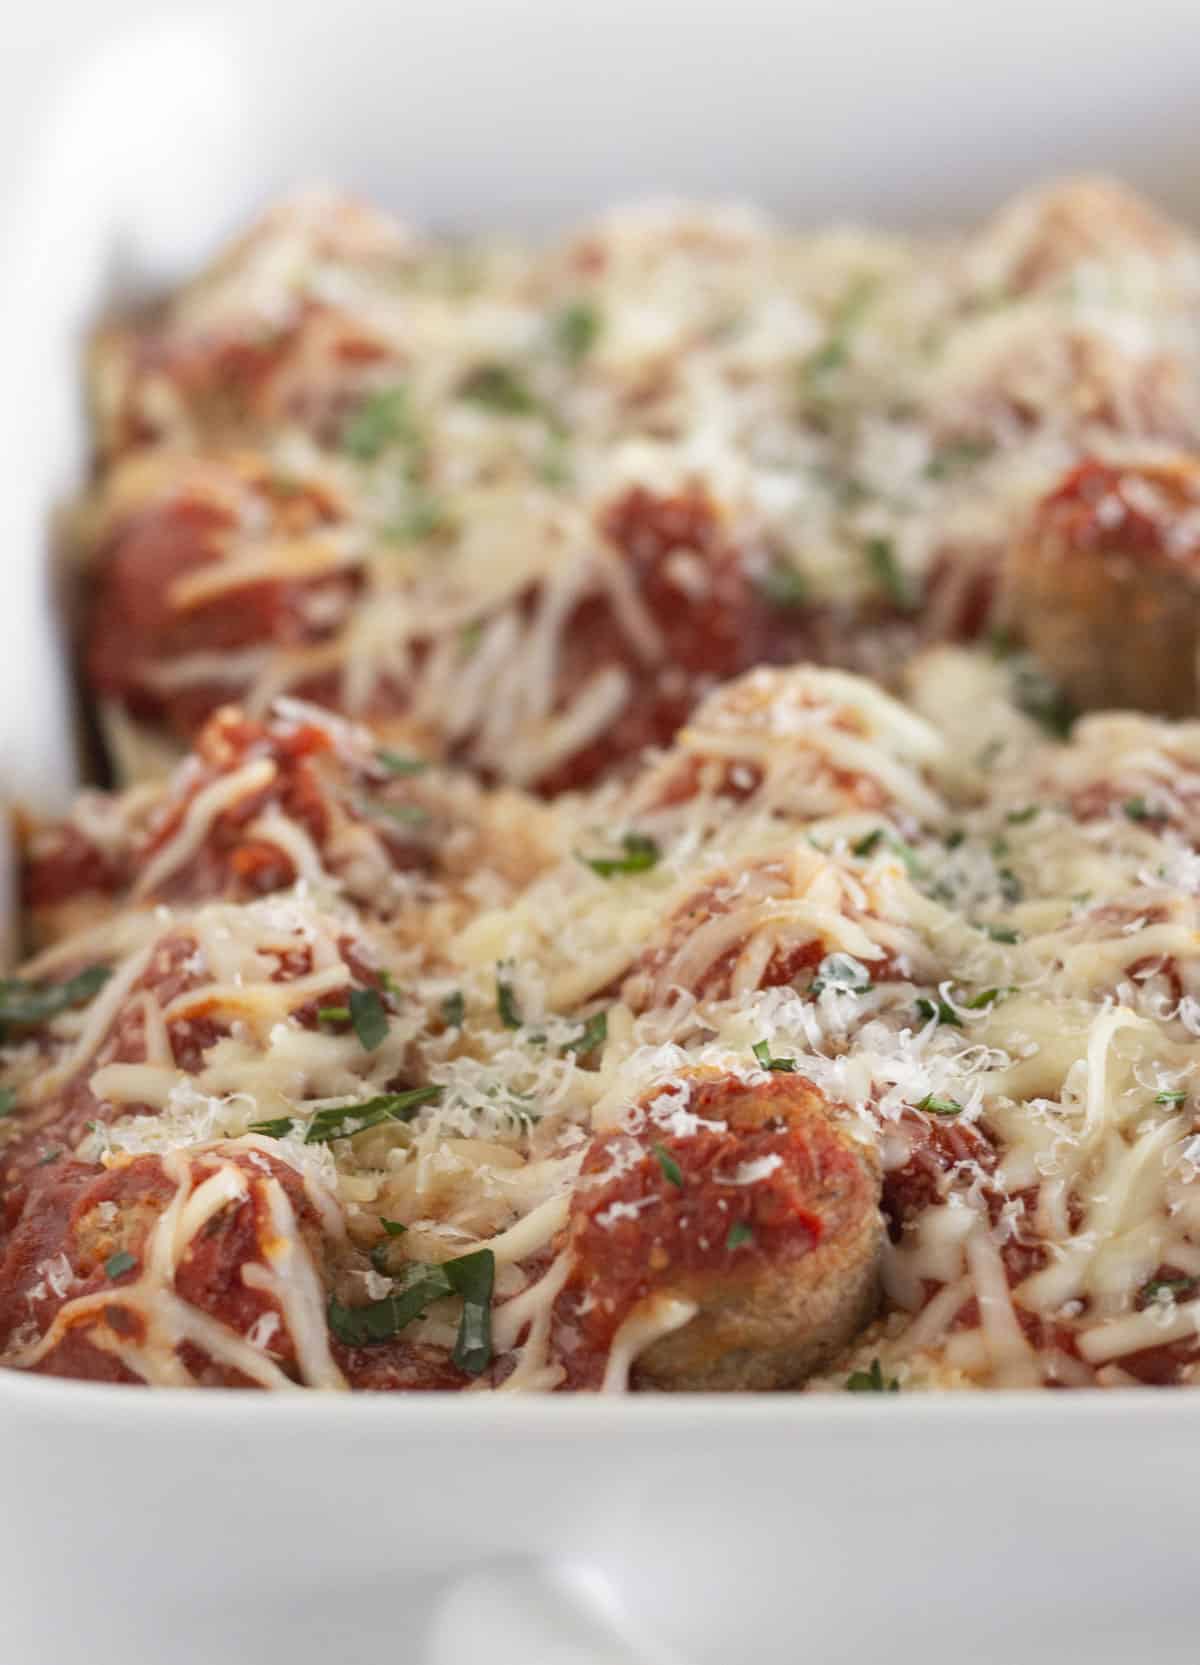 Finished meatball sub casserole in a white baking dish.